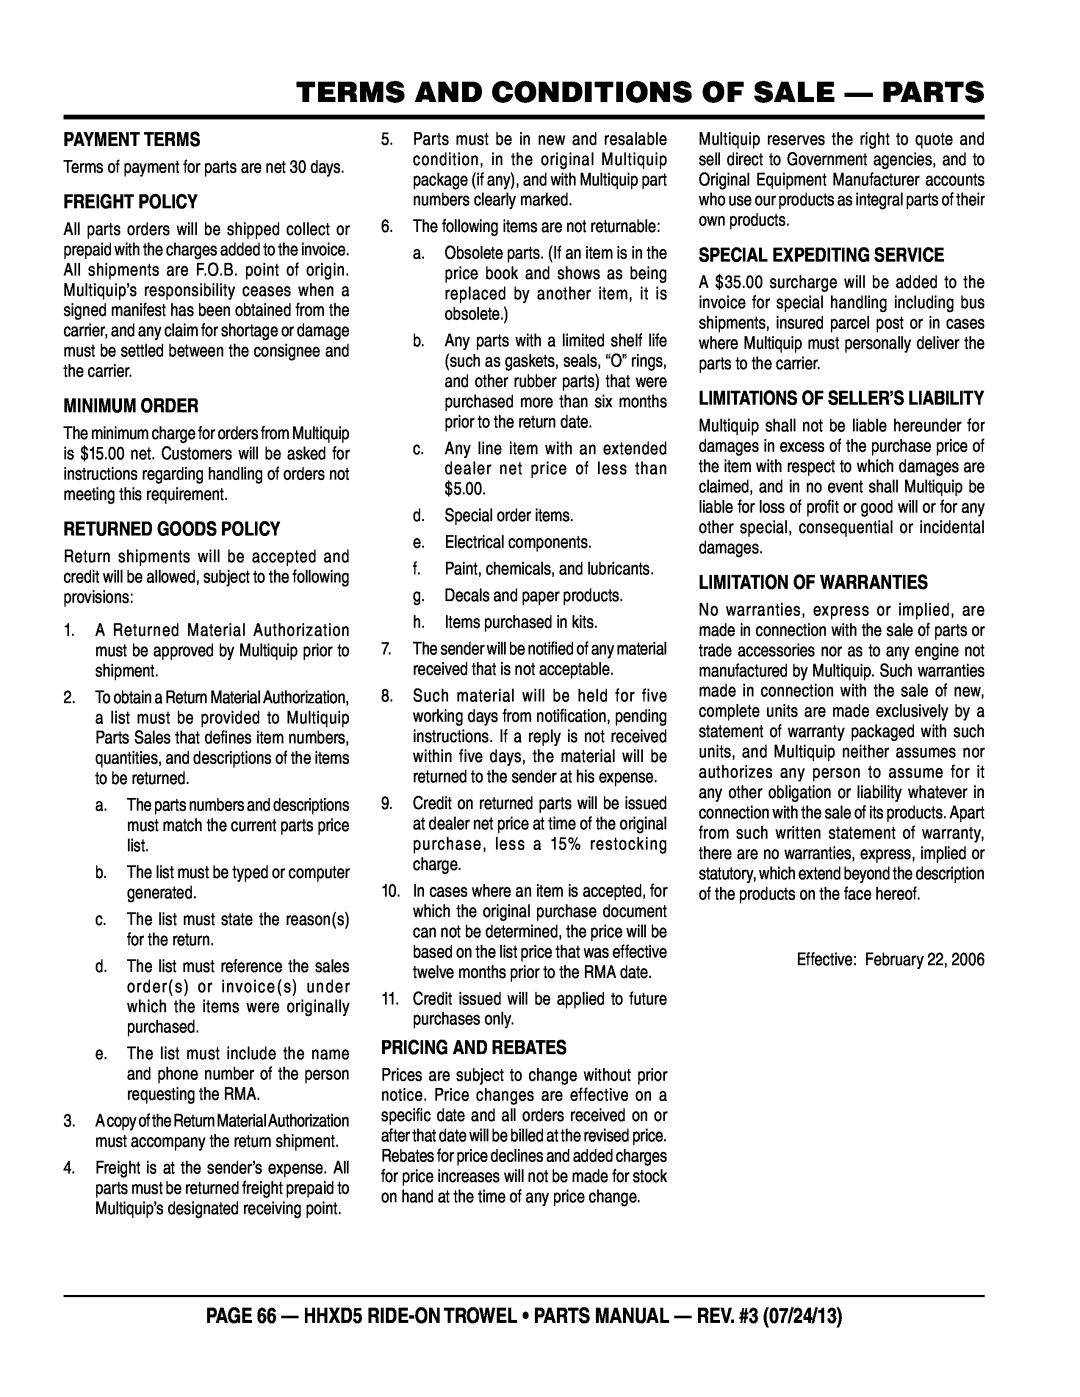 Multiquip HHSD5 Terms and Conditions of Sale - Parts, page 66 - HHXD5 RIDE-ON TROWEL parts manual - rev. #3 07/24/13 